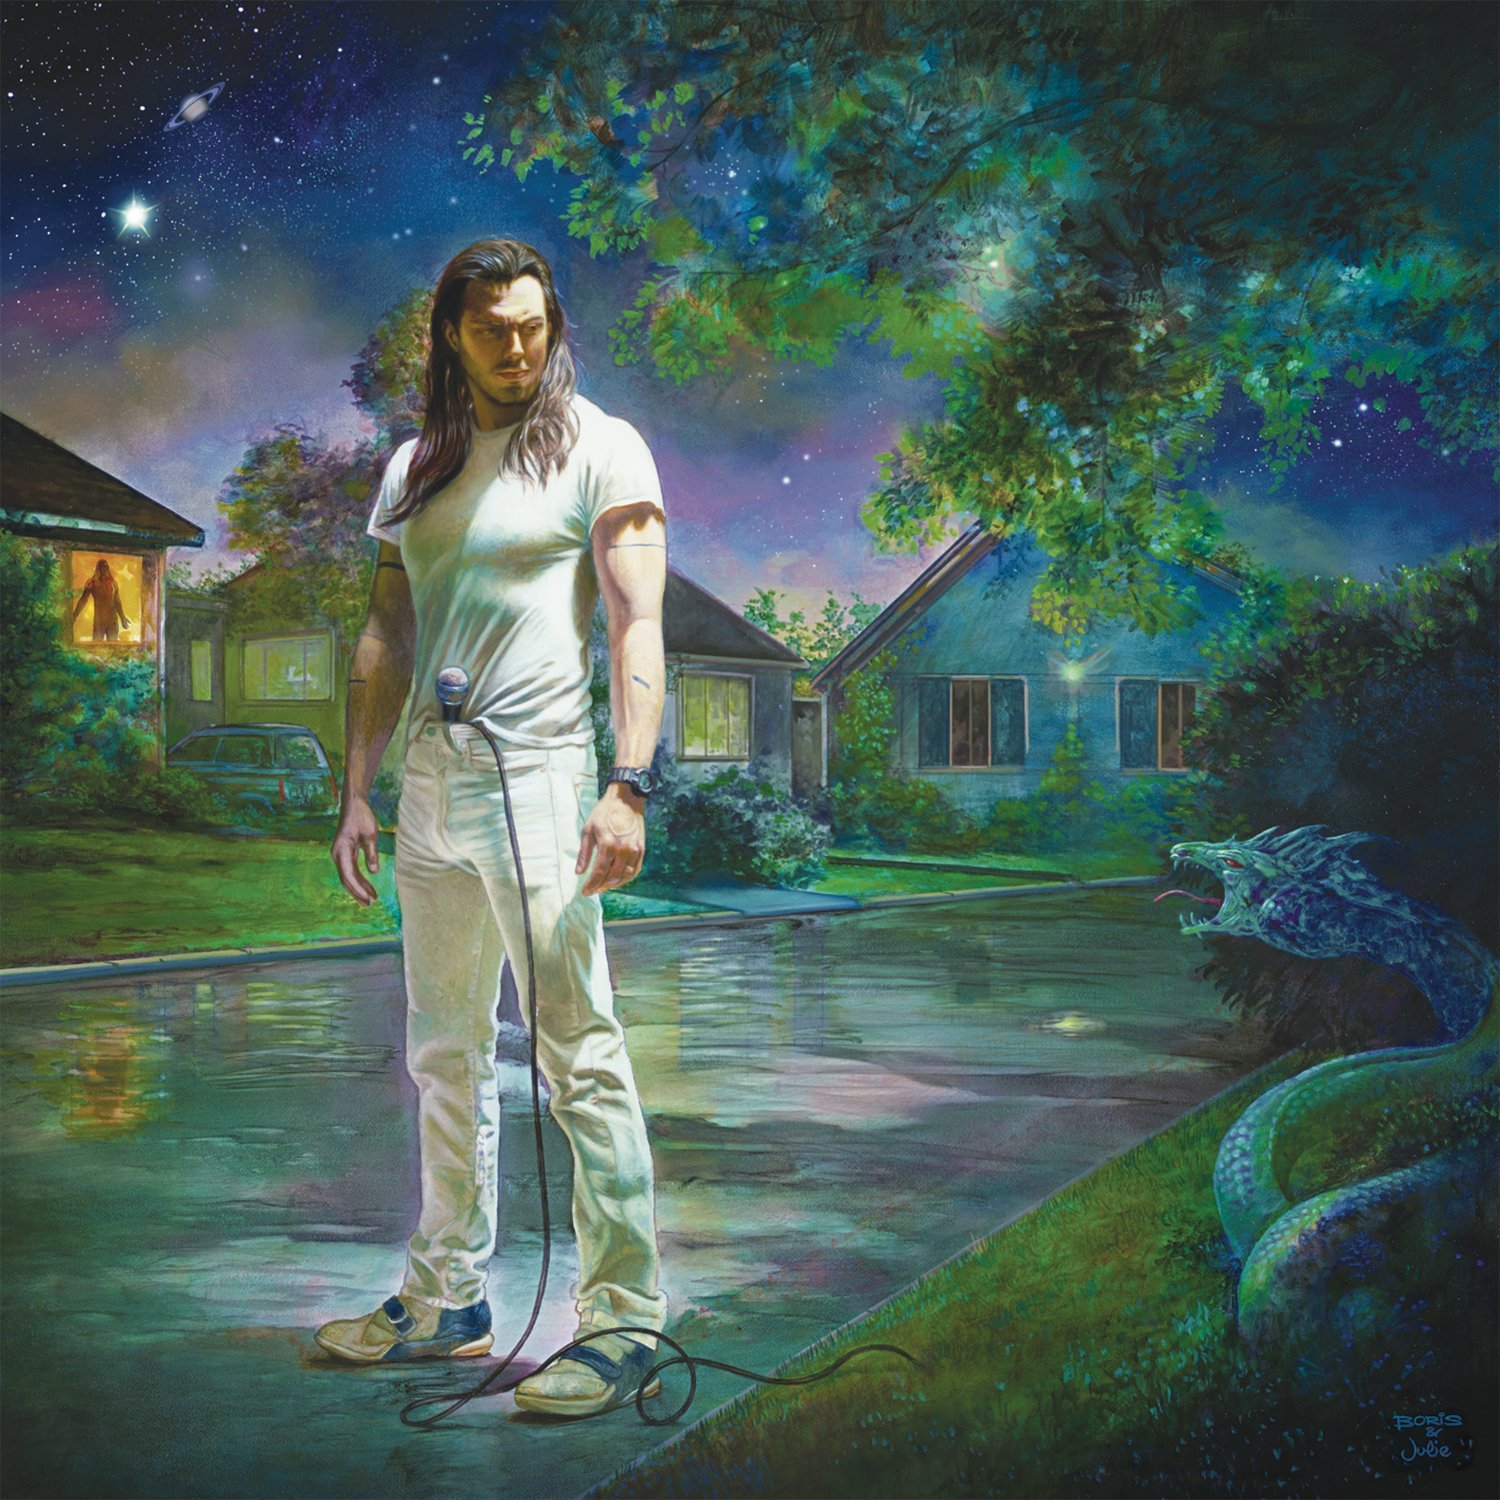 Let’s Go Down The “Andrew W.K. Doesn’t Exist” Rabbit Hole (Plus My Own Part In The Story!)